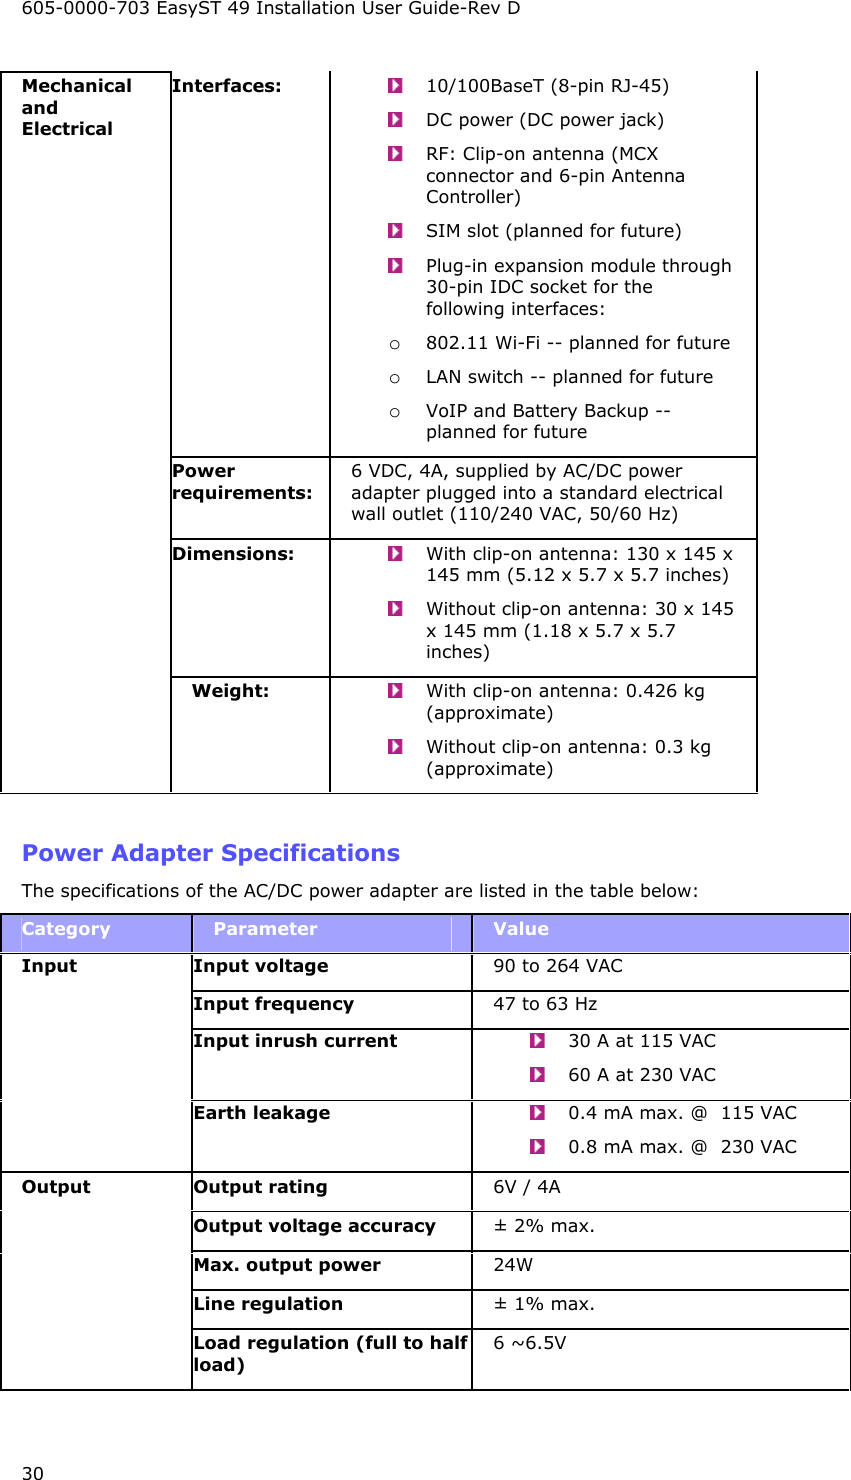 605-0000-703 EasyST 49 Installation User Guide-Rev D 30 Interfaces:    10/100BaseT (8-pin RJ-45)   DC power (DC power jack)   RF: Clip-on antenna (MCX connector and 6-pin Antenna Controller)   SIM slot (planned for future)   Plug-in expansion module through 30-pin IDC socket for the following interfaces: o  802.11 Wi-Fi -- planned for future o  LAN switch -- planned for future o  VoIP and Battery Backup -- planned for future Power requirements: 6 VDC, 4A, supplied by AC/DC power adapter plugged into a standard electrical wall outlet (110/240 VAC, 50/60 Hz) Dimensions:    With clip-on antenna: 130 x 145 x 145 mm (5.12 x 5.7 x 5.7 inches)   Without clip-on antenna: 30 x 145 x 145 mm (1.18 x 5.7 x 5.7 inches) Mechanical and Electrical Weight:    With clip-on antenna: 0.426 kg (approximate)   Without clip-on antenna: 0.3 kg (approximate)  Power Adapter Specifications The specifications of the AC/DC power adapter are listed in the table below: Category  Parameter  Value Input voltage   90 to 264 VAC Input frequency   47 to 63 Hz Input inrush current     30 A at 115 VAC   60 A at 230 VAC Input Earth leakage     0.4 mA max. @  115 VAC   0.8 mA max. @  230 VAC Output rating   6V / 4A Output voltage accuracy   ± 2% max. Max. output power  24W Line regulation   ± 1% max. Output Load regulation (full to half load)  6 ˜6.5V  